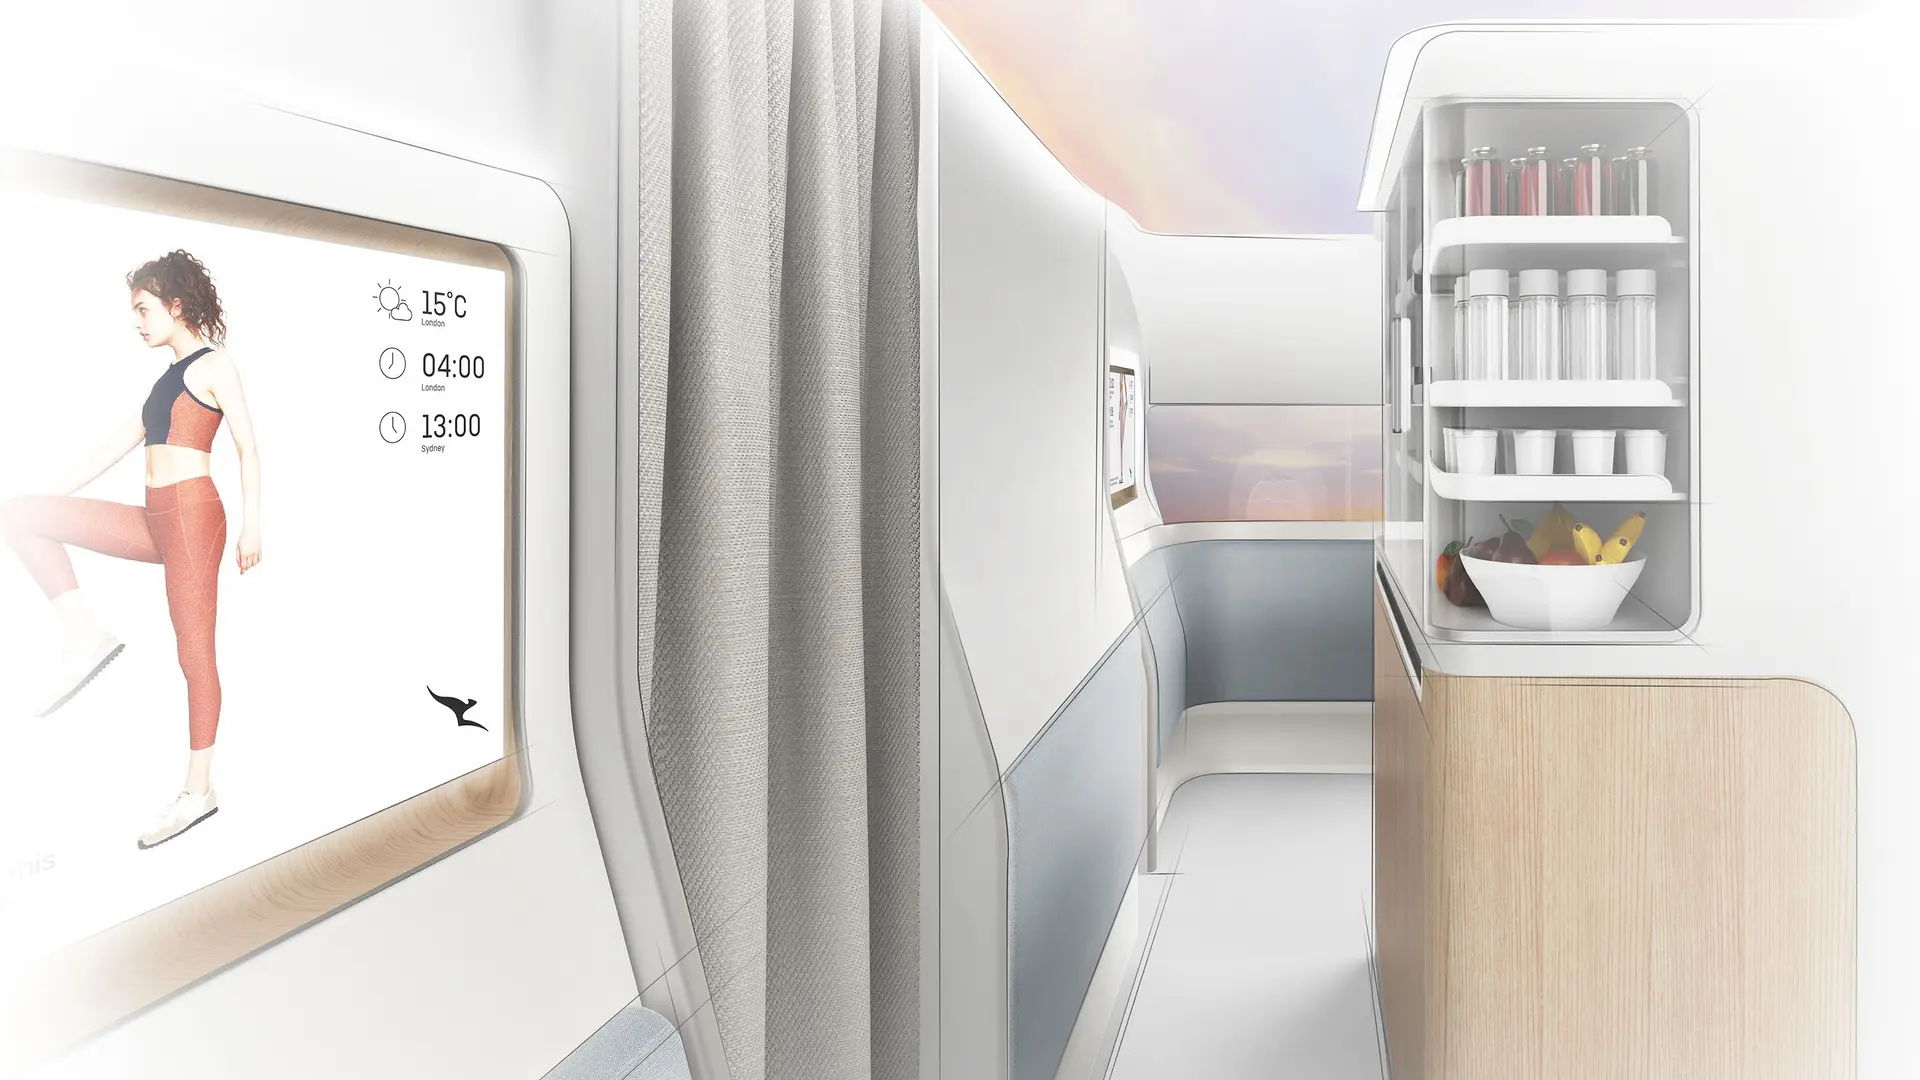 Airlines News - Qantas unveils new First Class Suites for the world´s longest flight